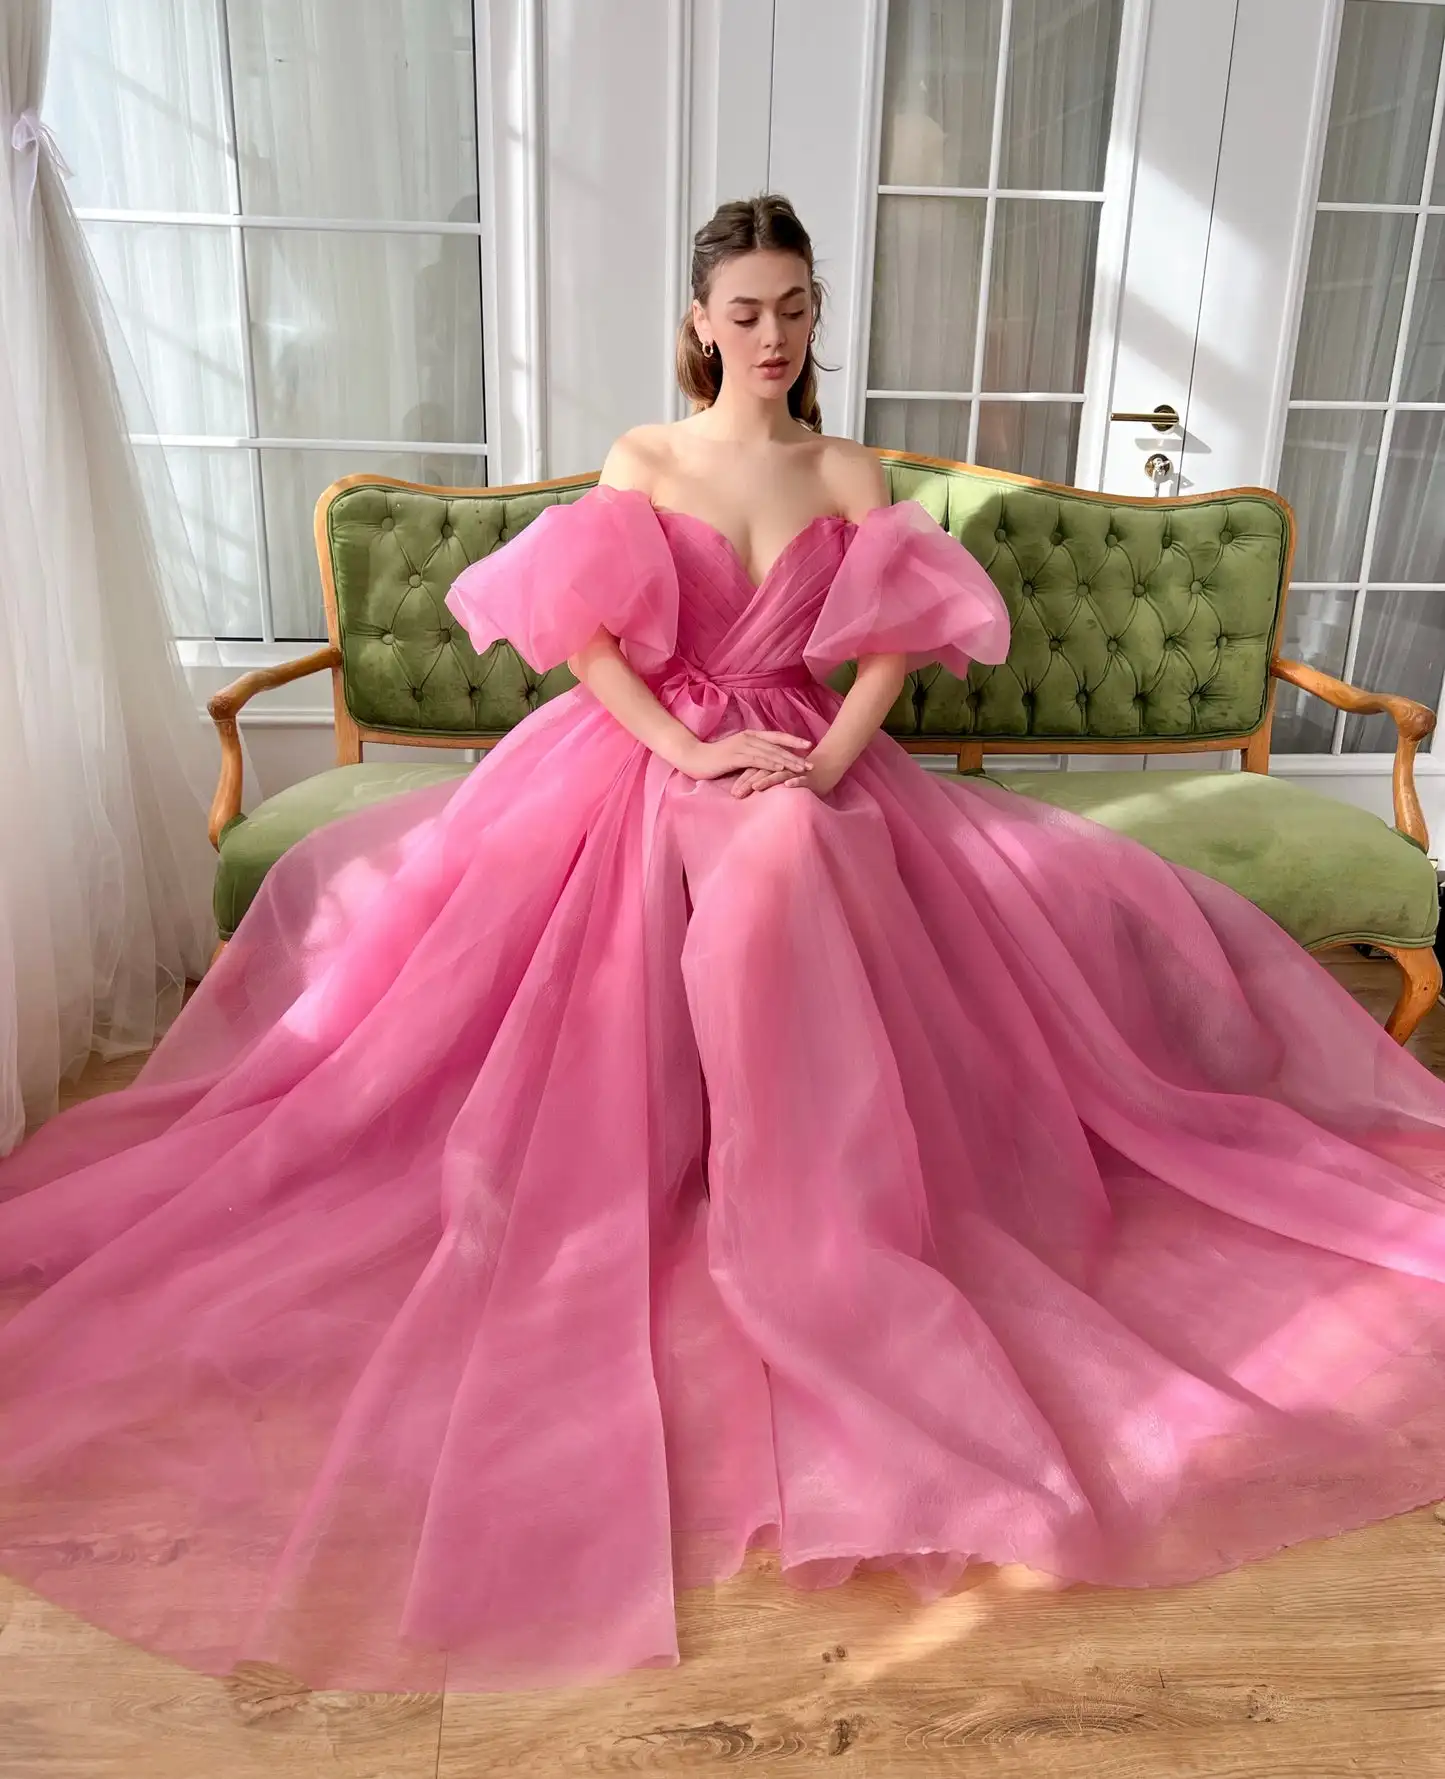 

Sweetheart Off Shoulder Organza Long Prom Dress Puffy Short Sleeve A Line Evening Party Gown With Bow Slit Graduation Gown